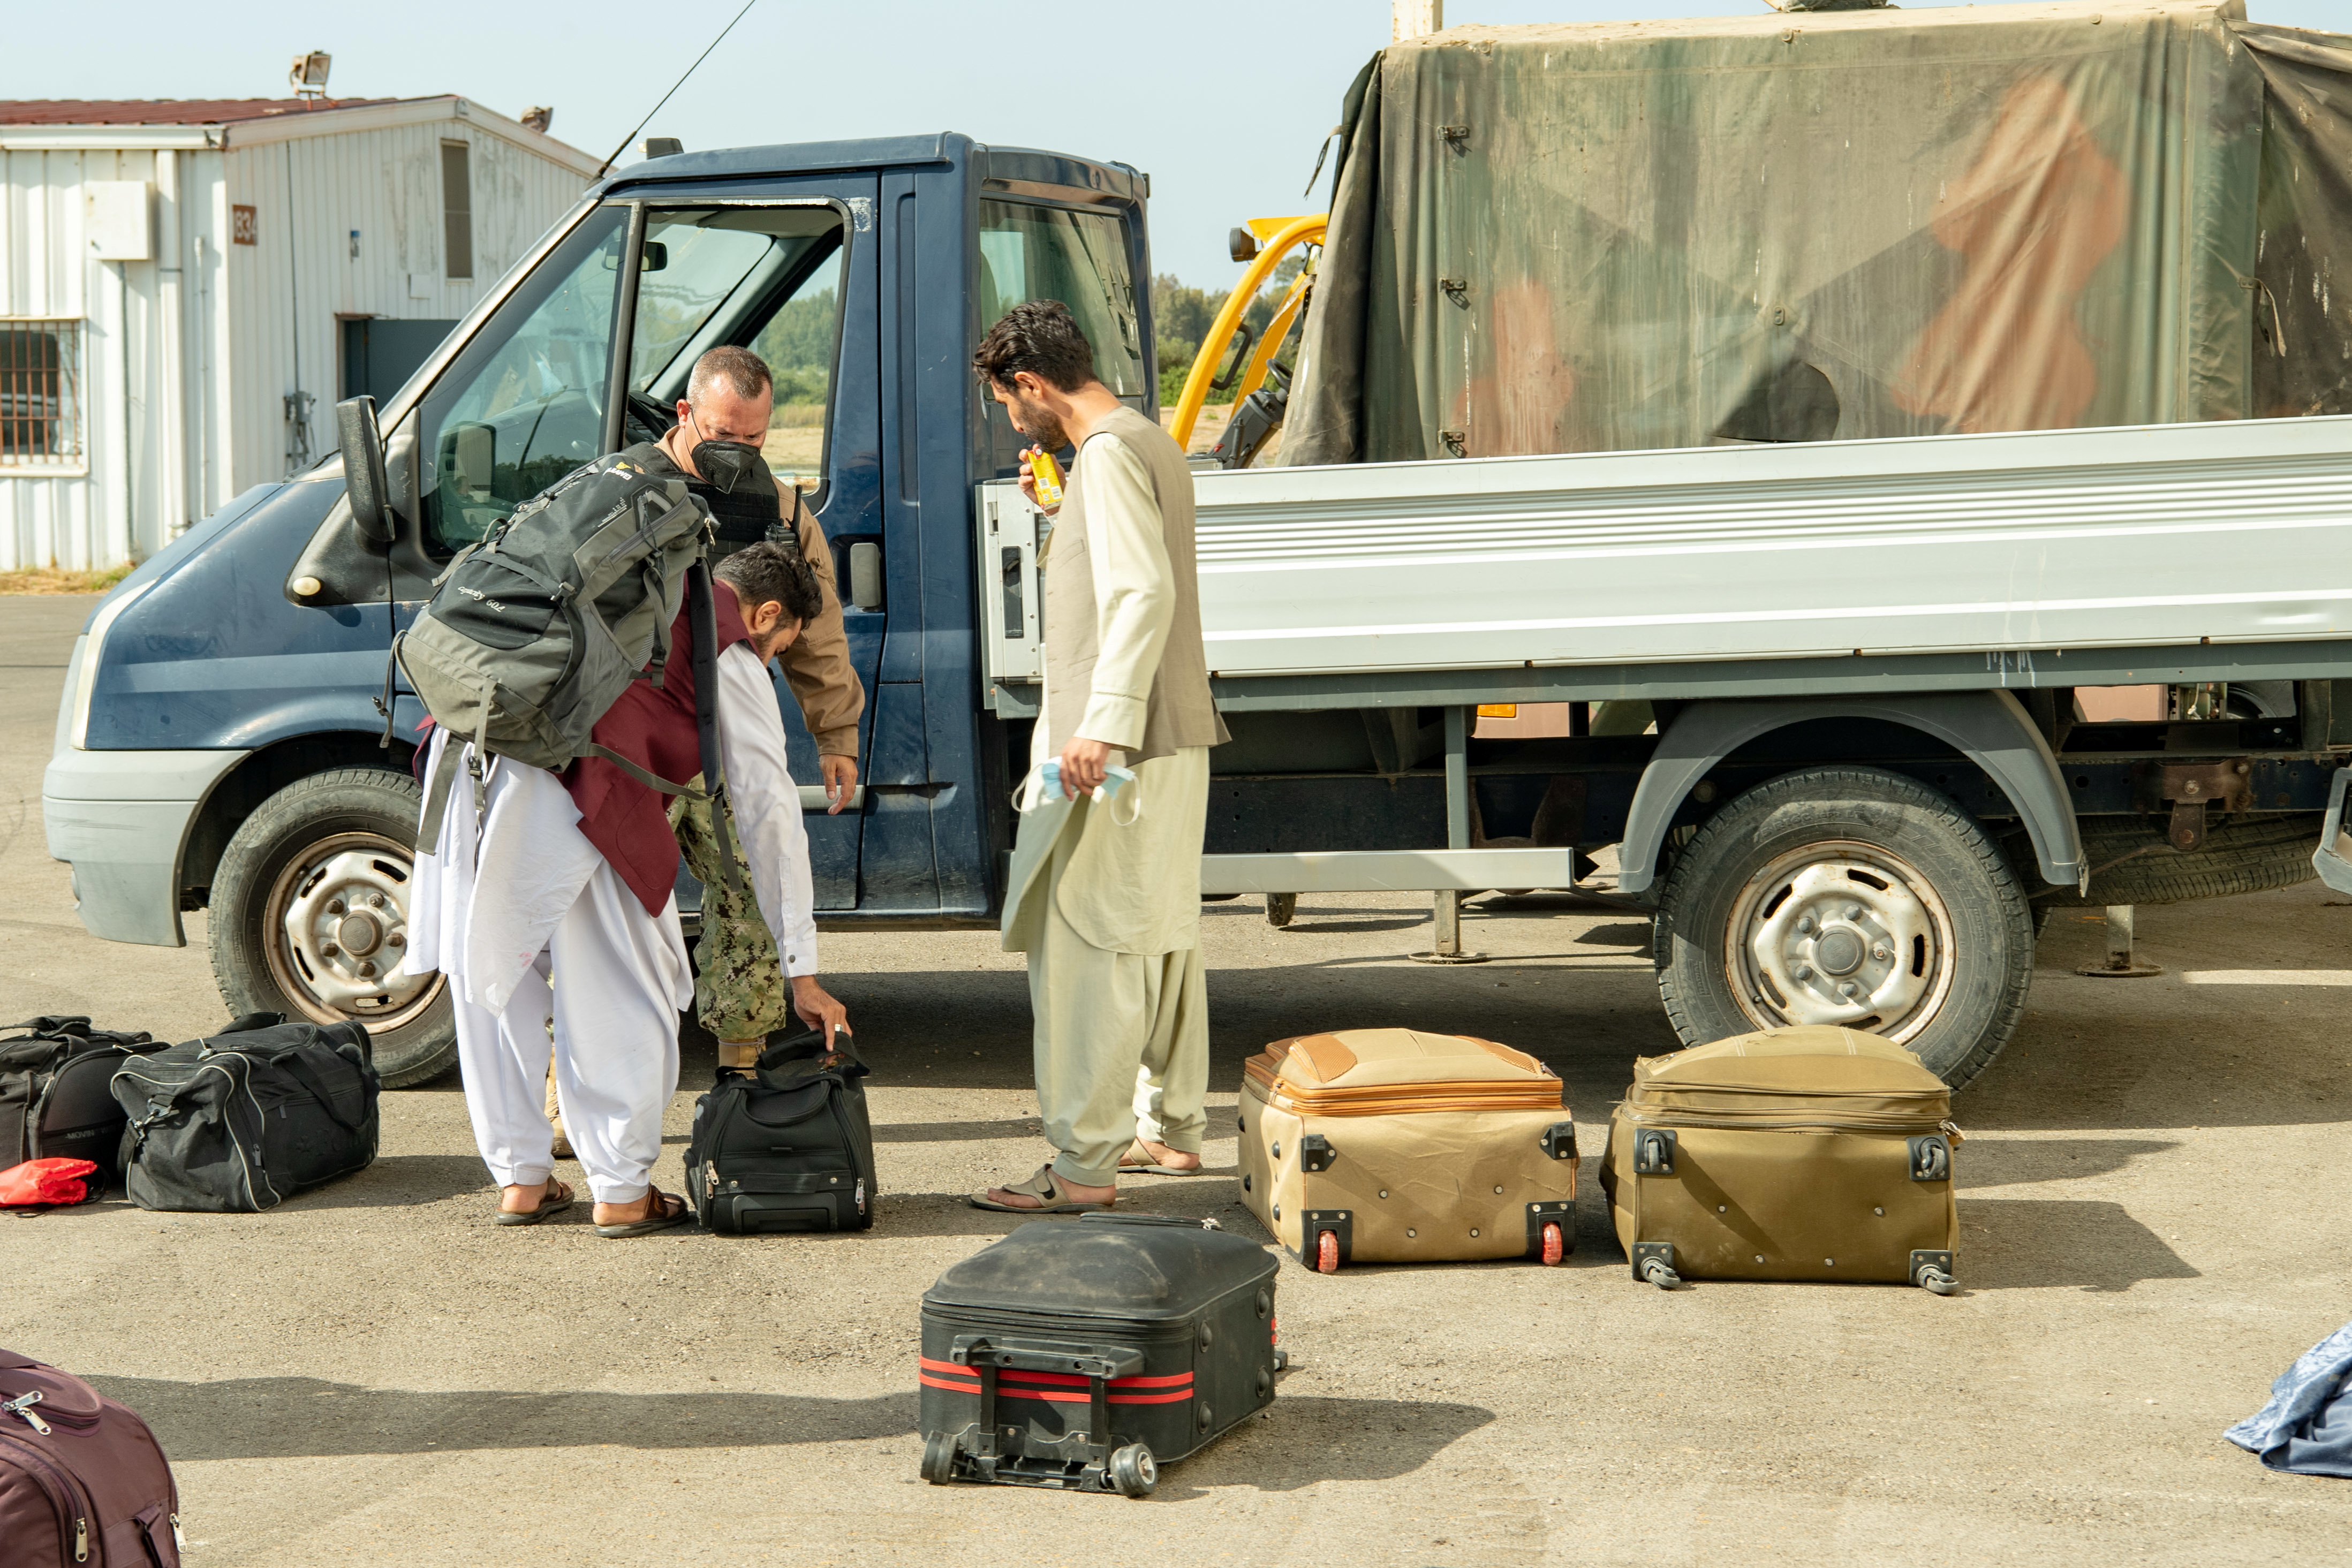 Afghan citizens who have been evacuated from Kabul arrive at Naval Station (NAVSTA) Rota Air Base